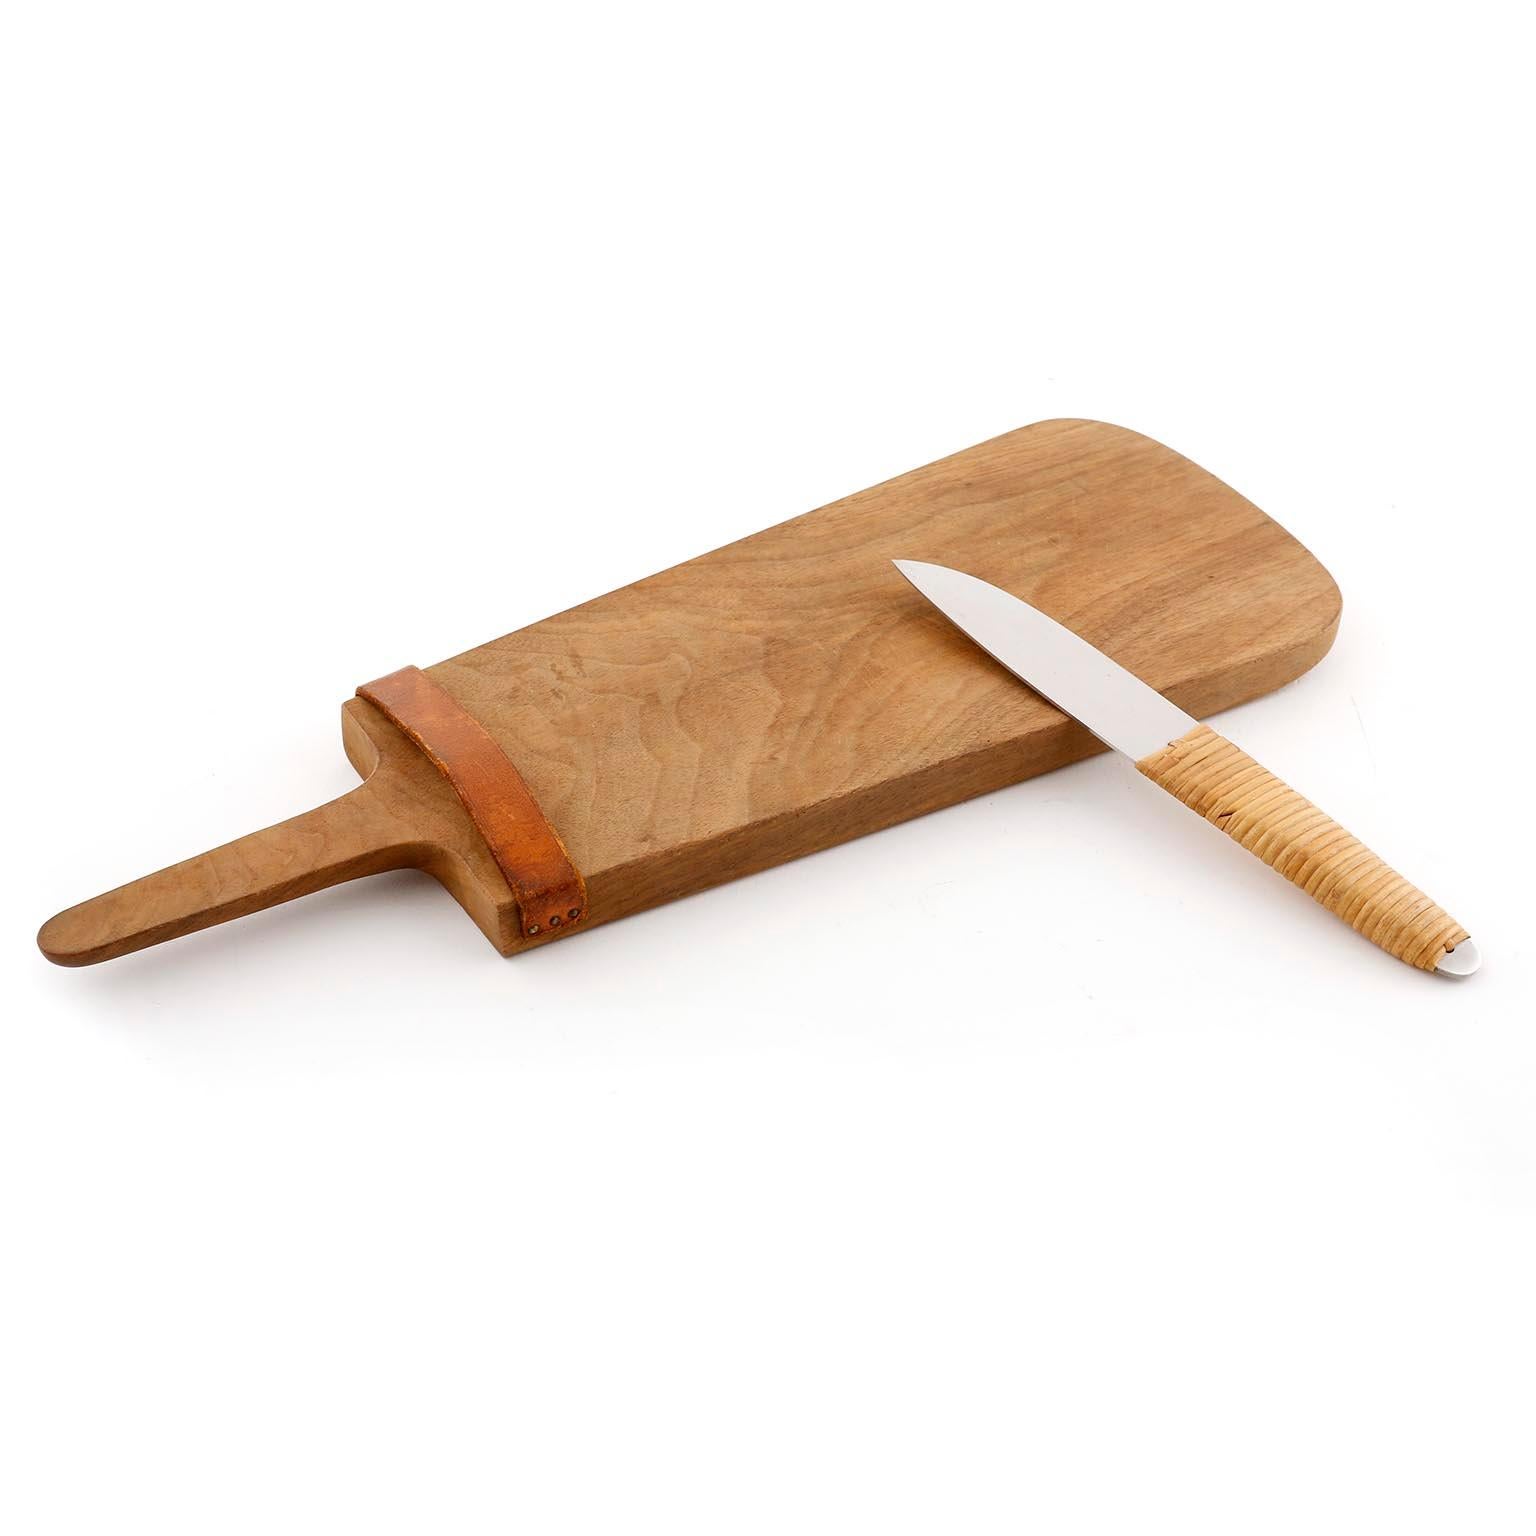 A chopping board designed by Carl Auböck, manufactured by Carl Auböck workshop in midcentury, Vienna, circa 1950.
The board is made of walnut. The knife is made of wicker and stainless steel and stamped with 'Auböck STAINLESS MADE IN AUSTRIA'.
An